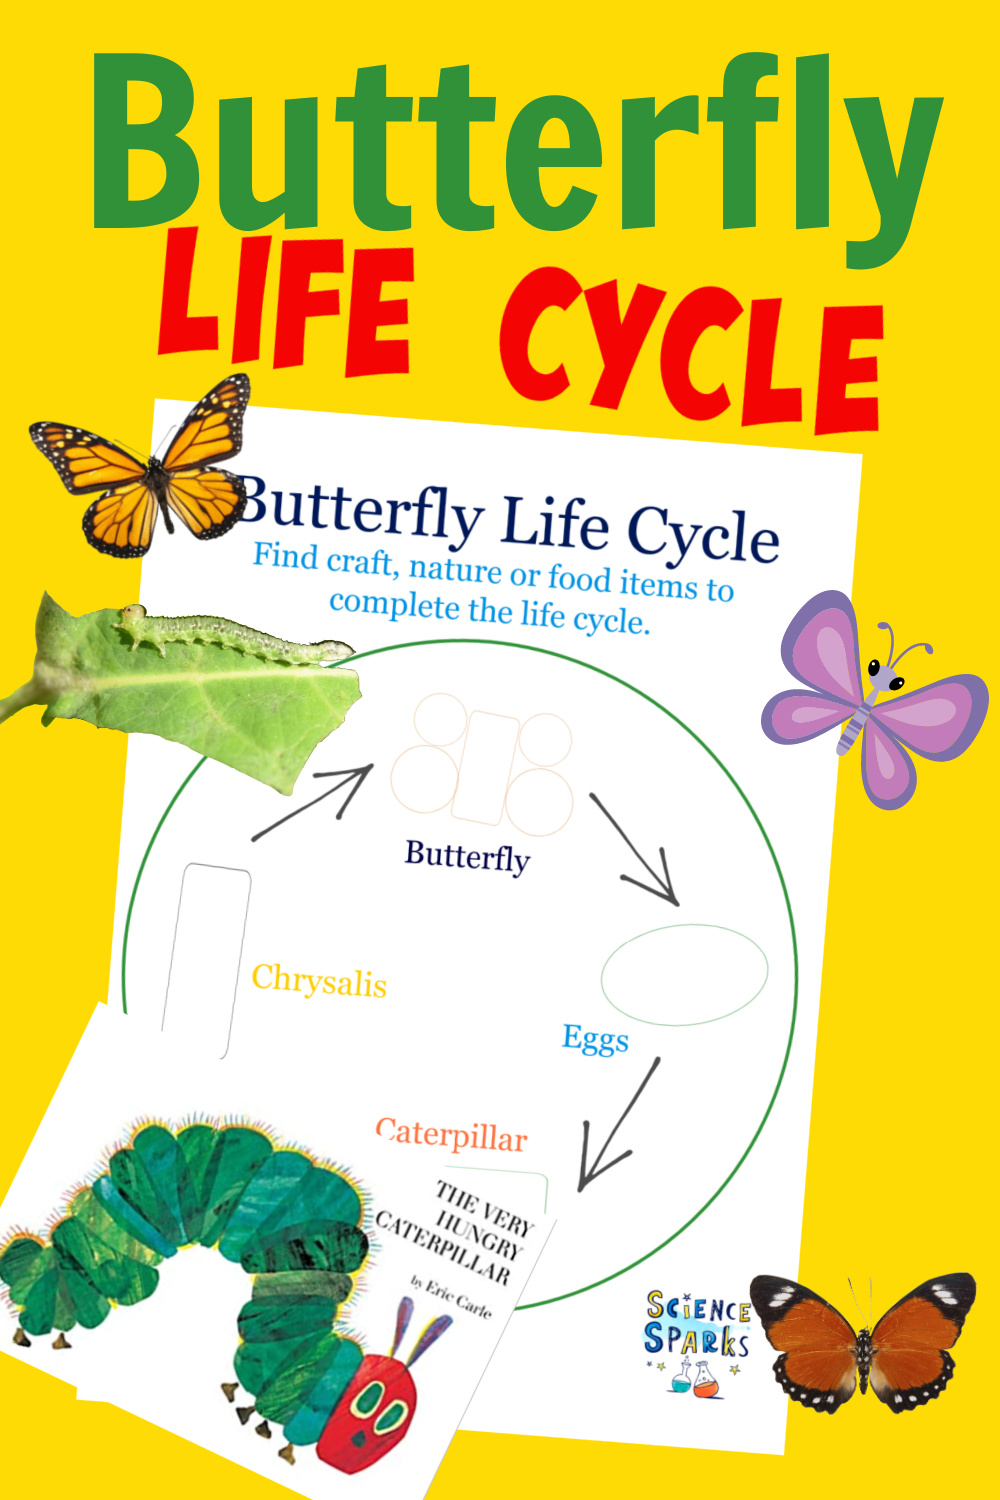 edible life cycle of a butterfly